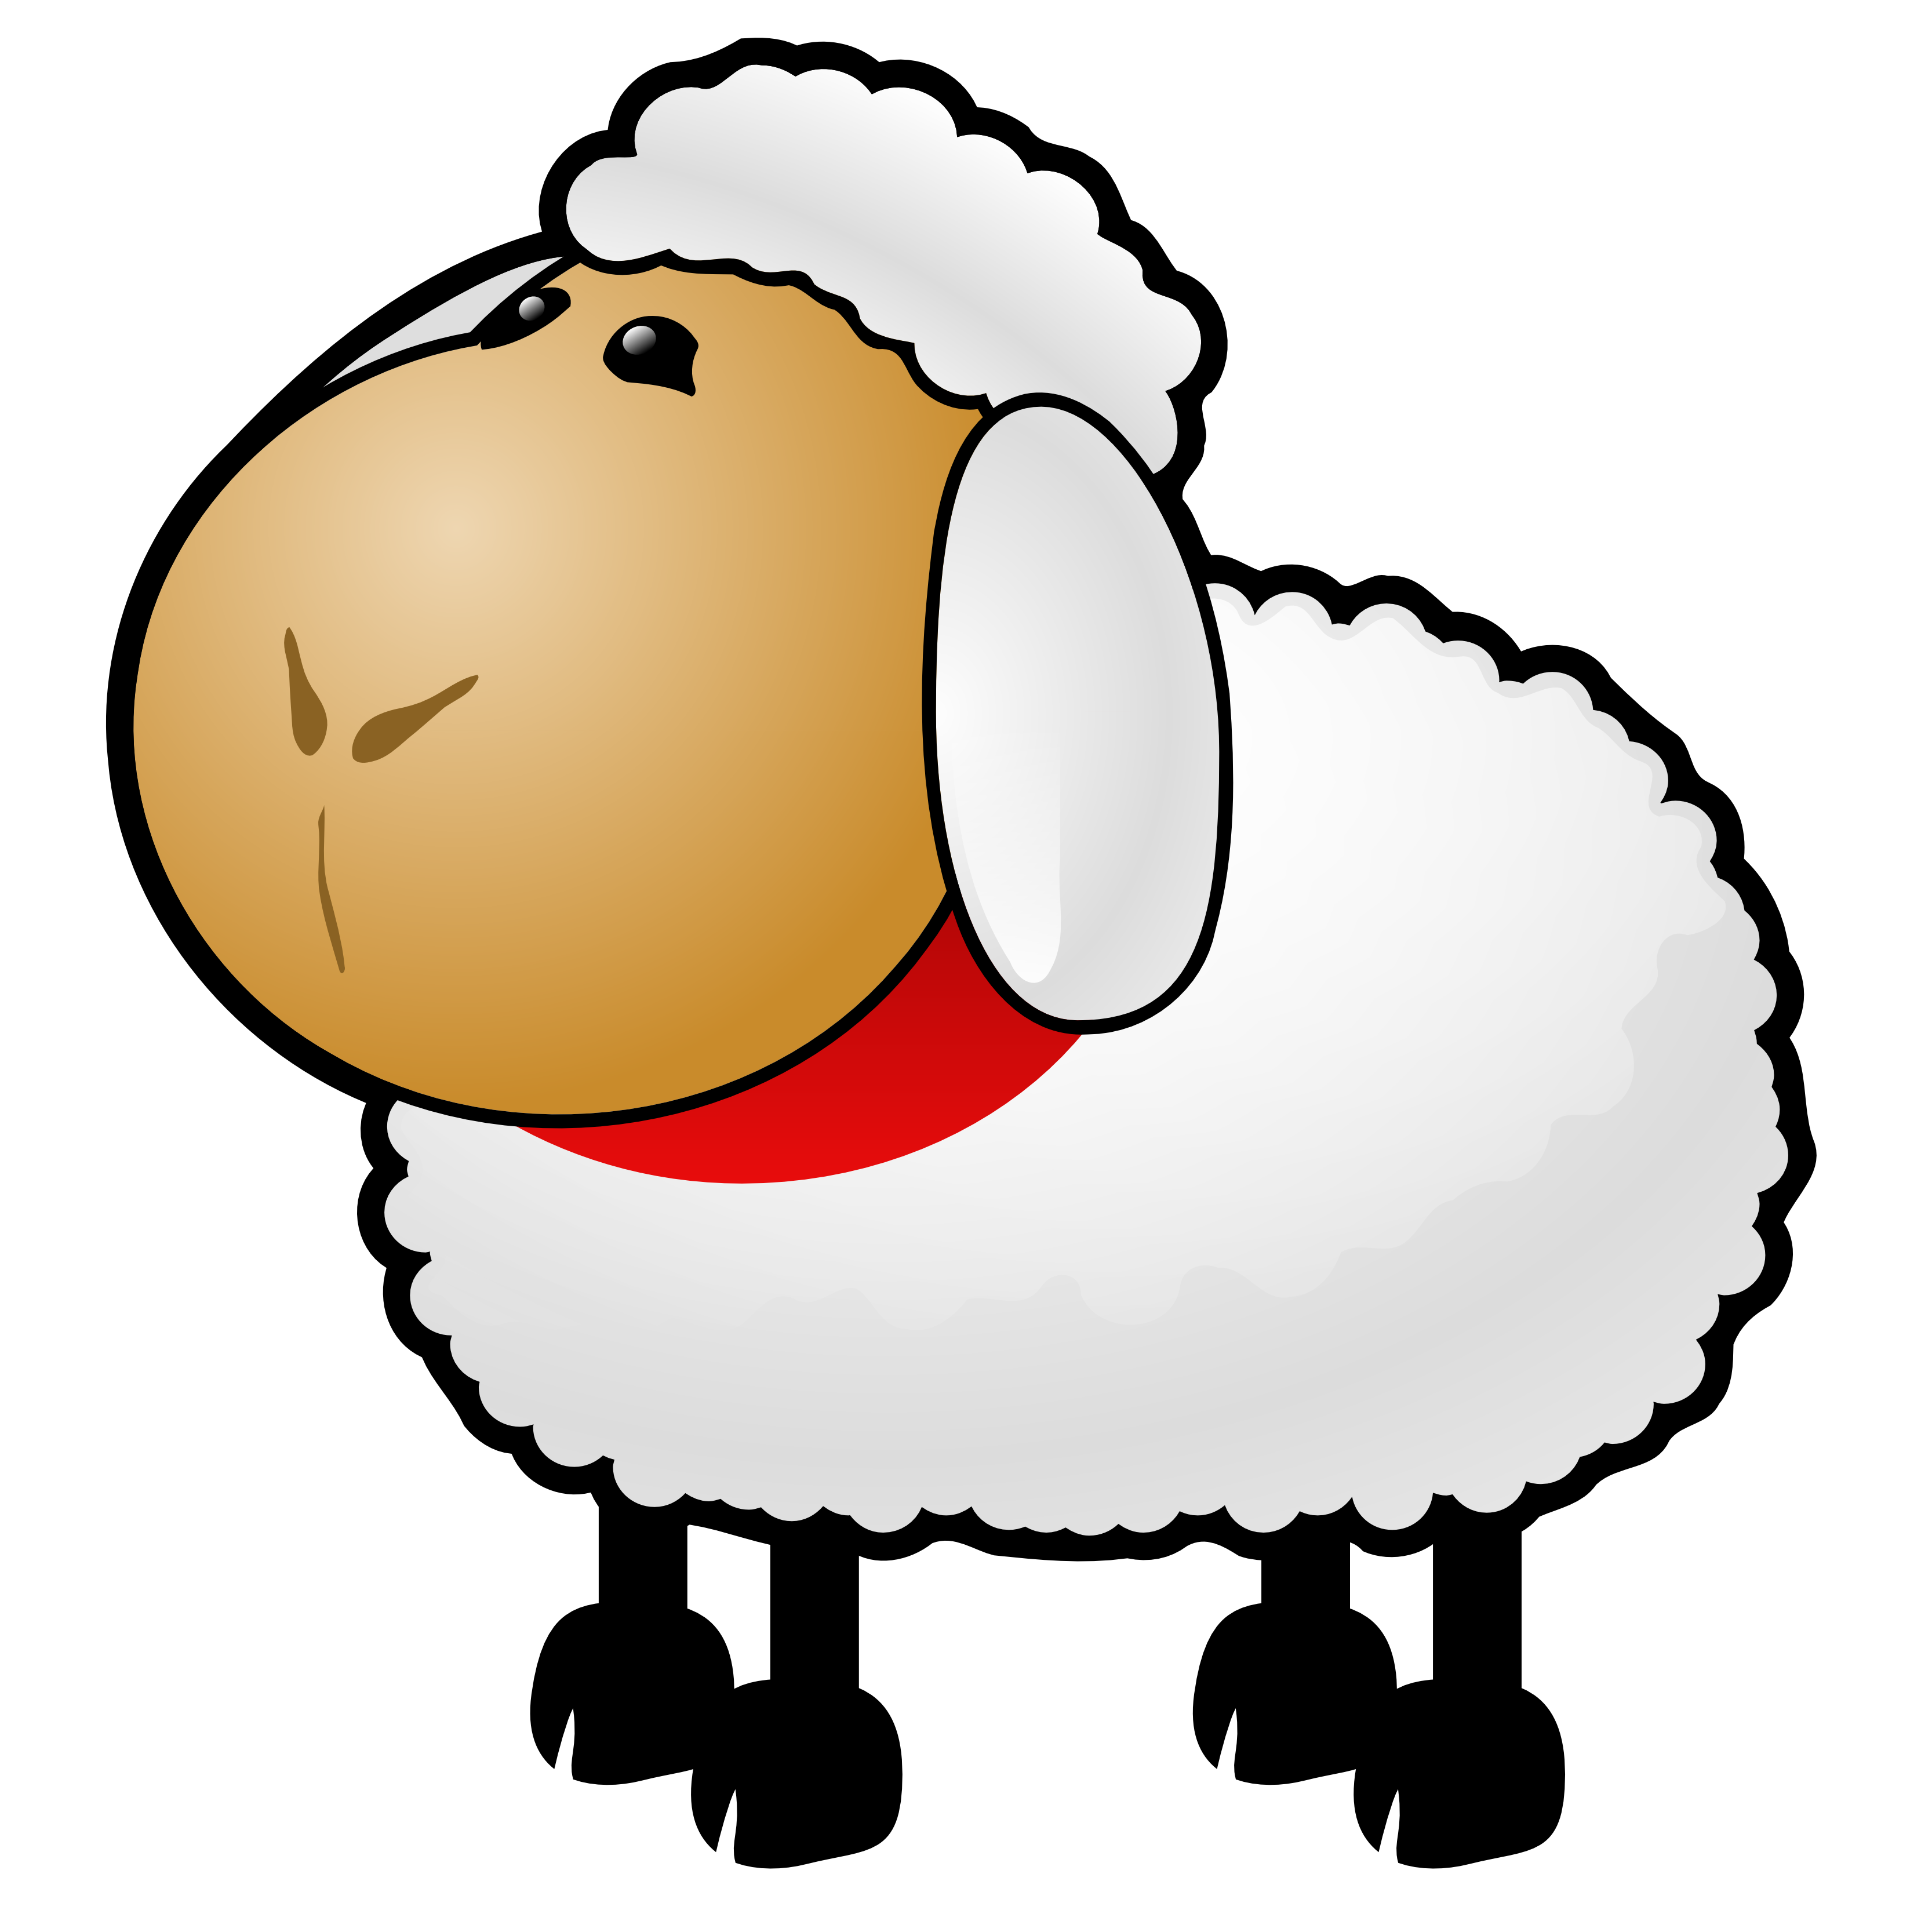 Sheep lamb clipart black and white free clipart images 2